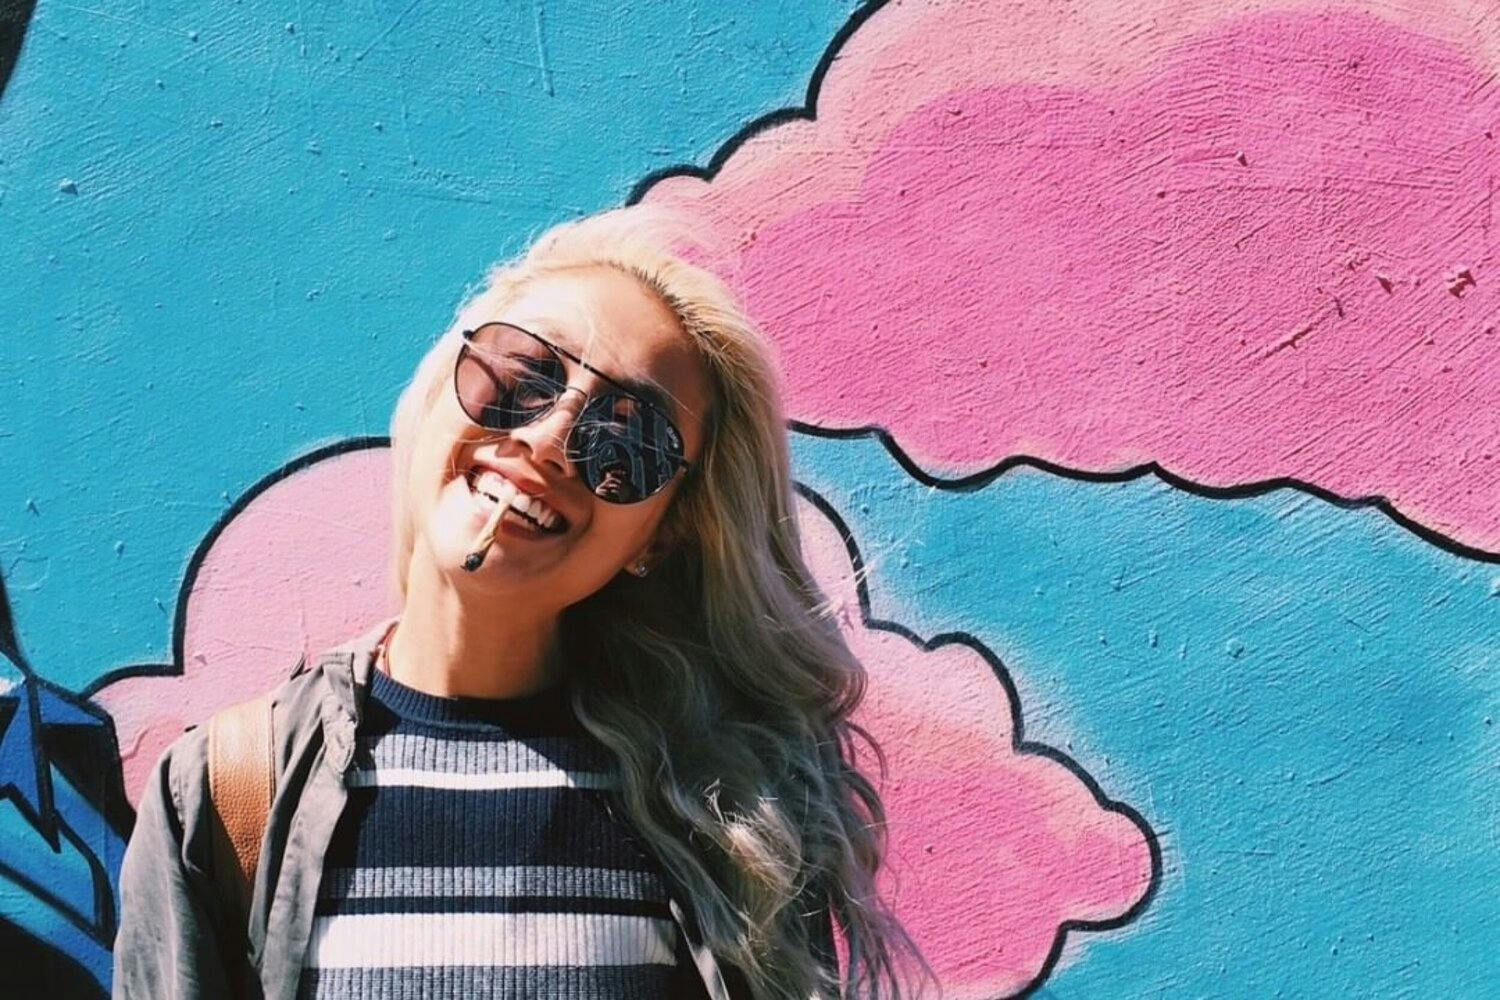 Young woman smiling and wearing sunglasses, holding a joint between her lips and standing in front of a wall painted sky blue with pink clouds.